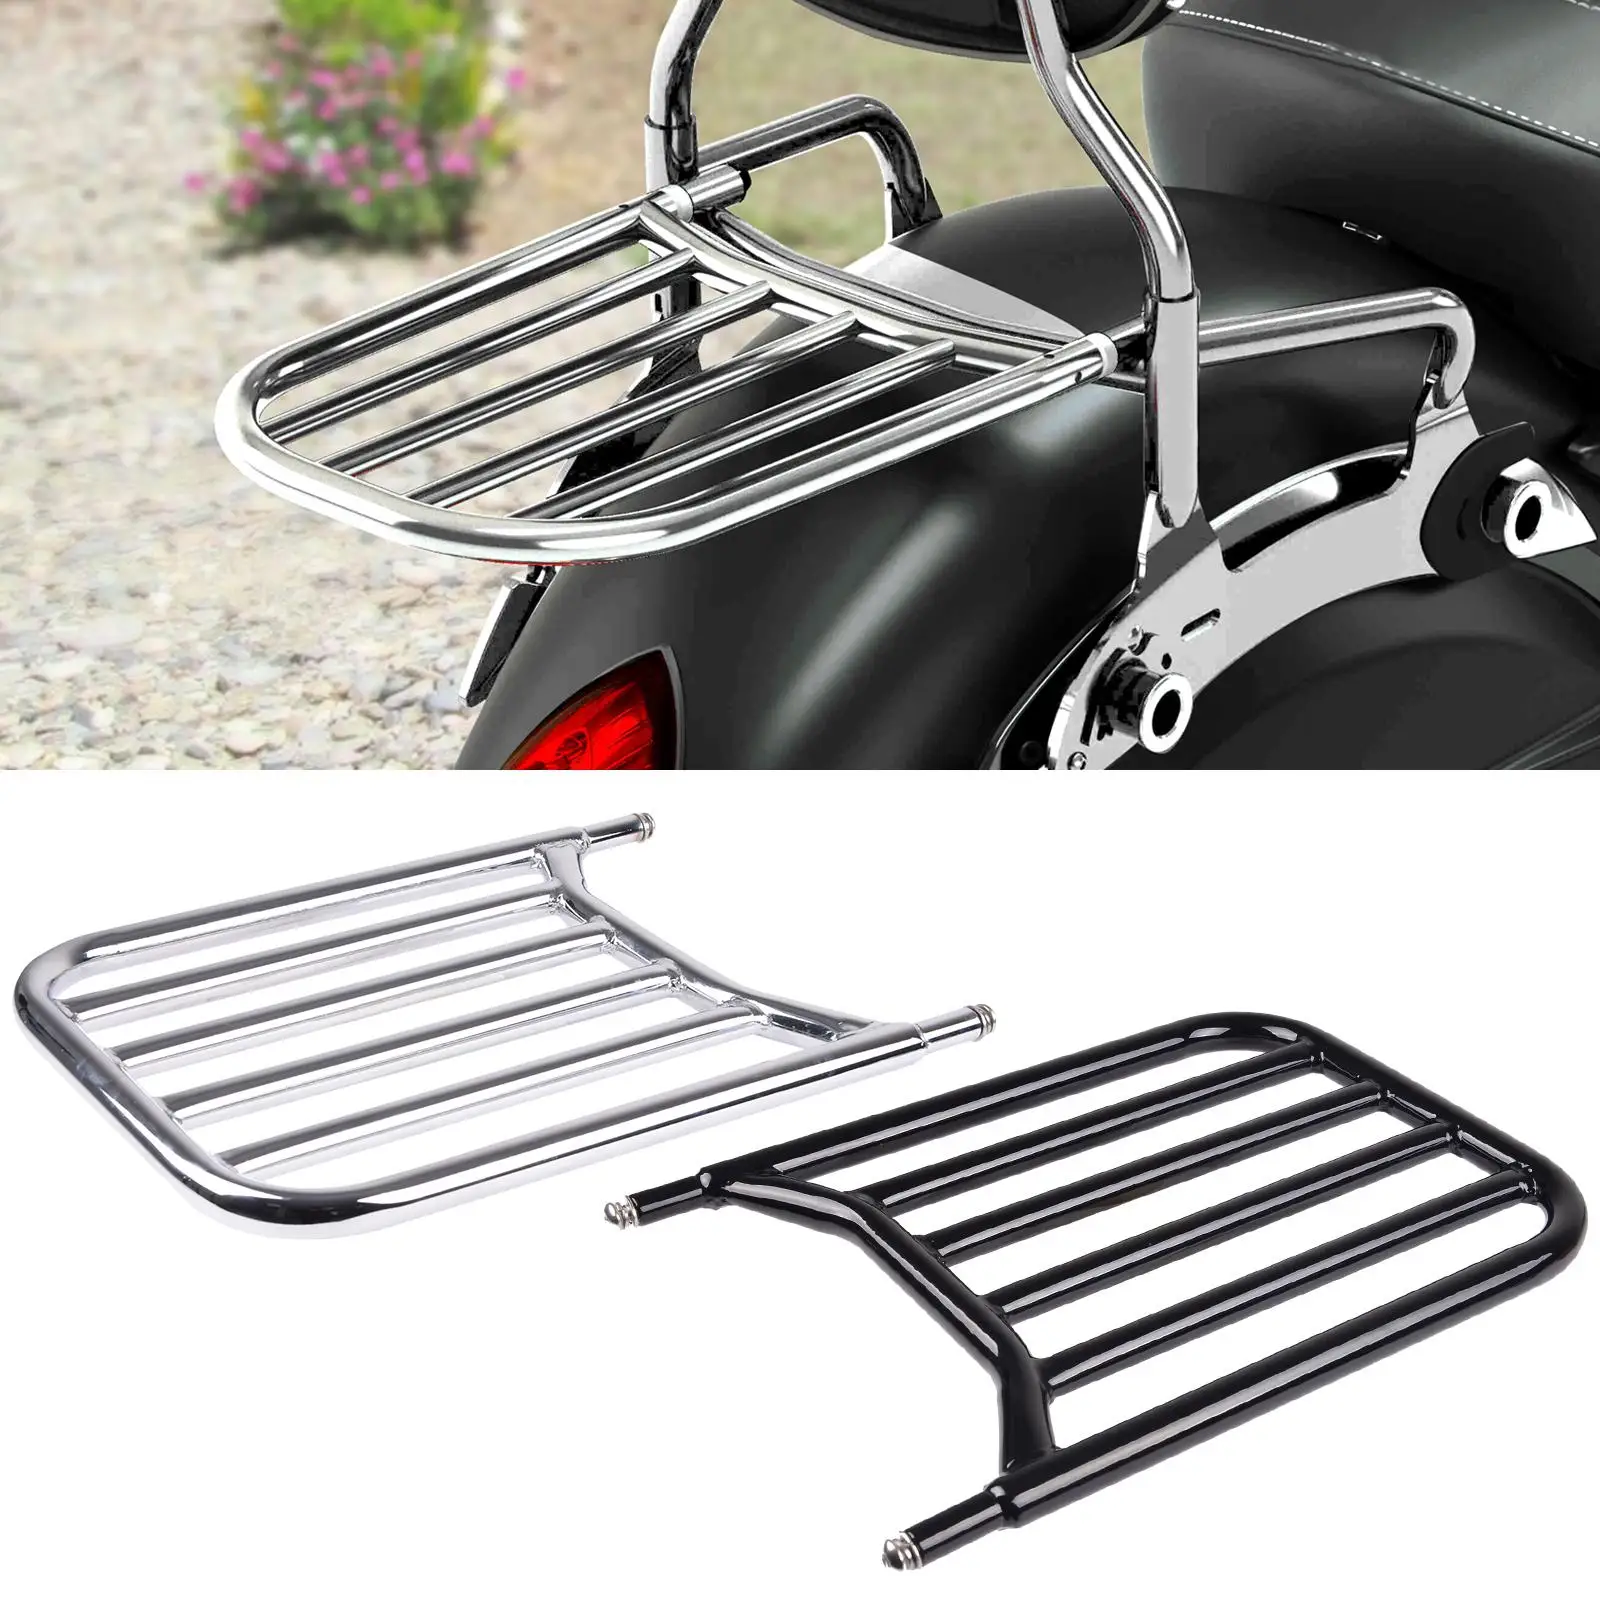 Rear Backrest Sissy Bar Accessories Cargo Carrier Luggage Rack Fit for Roadmaster Indian Chieftain Vintage Classic 2014-2021